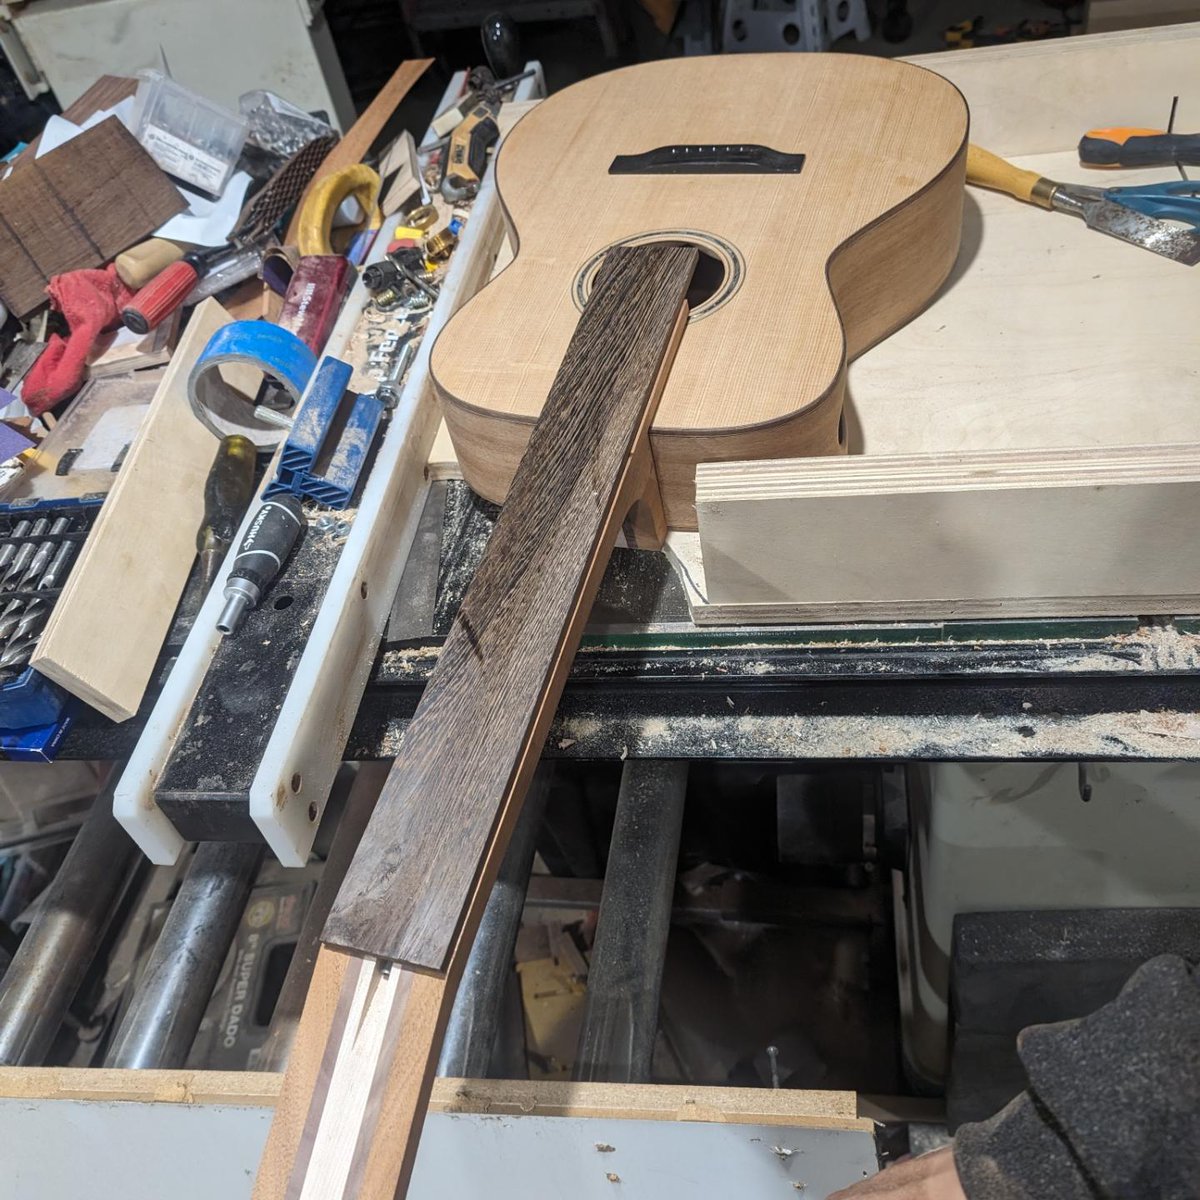 80% done
#veterans #smallbusiness
#luthier #guitar #handmade #luthiery #music #guitarporn #woodworking  #guitars #guitarmaker #electricguitar #luthieria #customguitar #guitarsofinstagram #guitarplayer  #customguitars #guitarbuilder #handmadeguitar #guitarrepair #guitartech